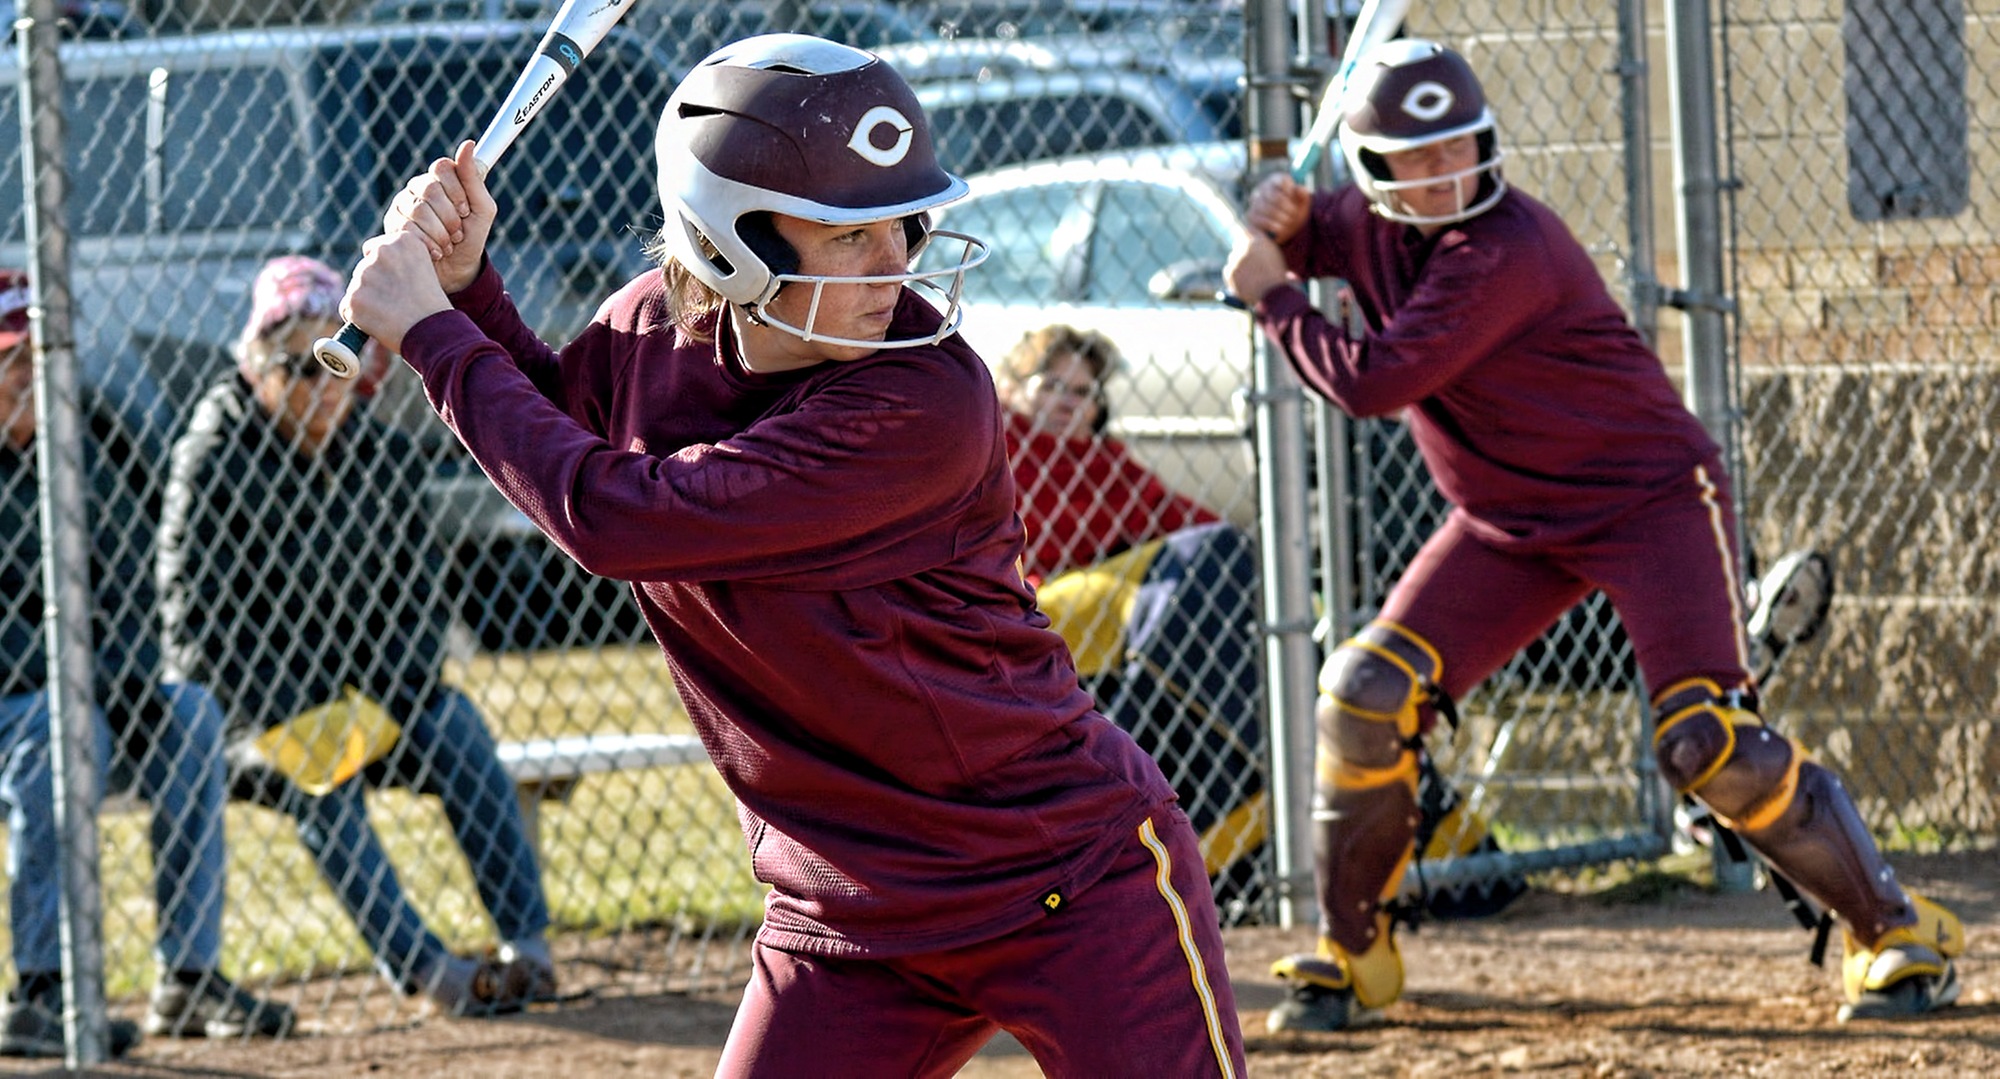 Freshman Megan Gavin had a solo home run in the first game at Carleton and had hits in both games of the Cobbers' DH with the Knights.